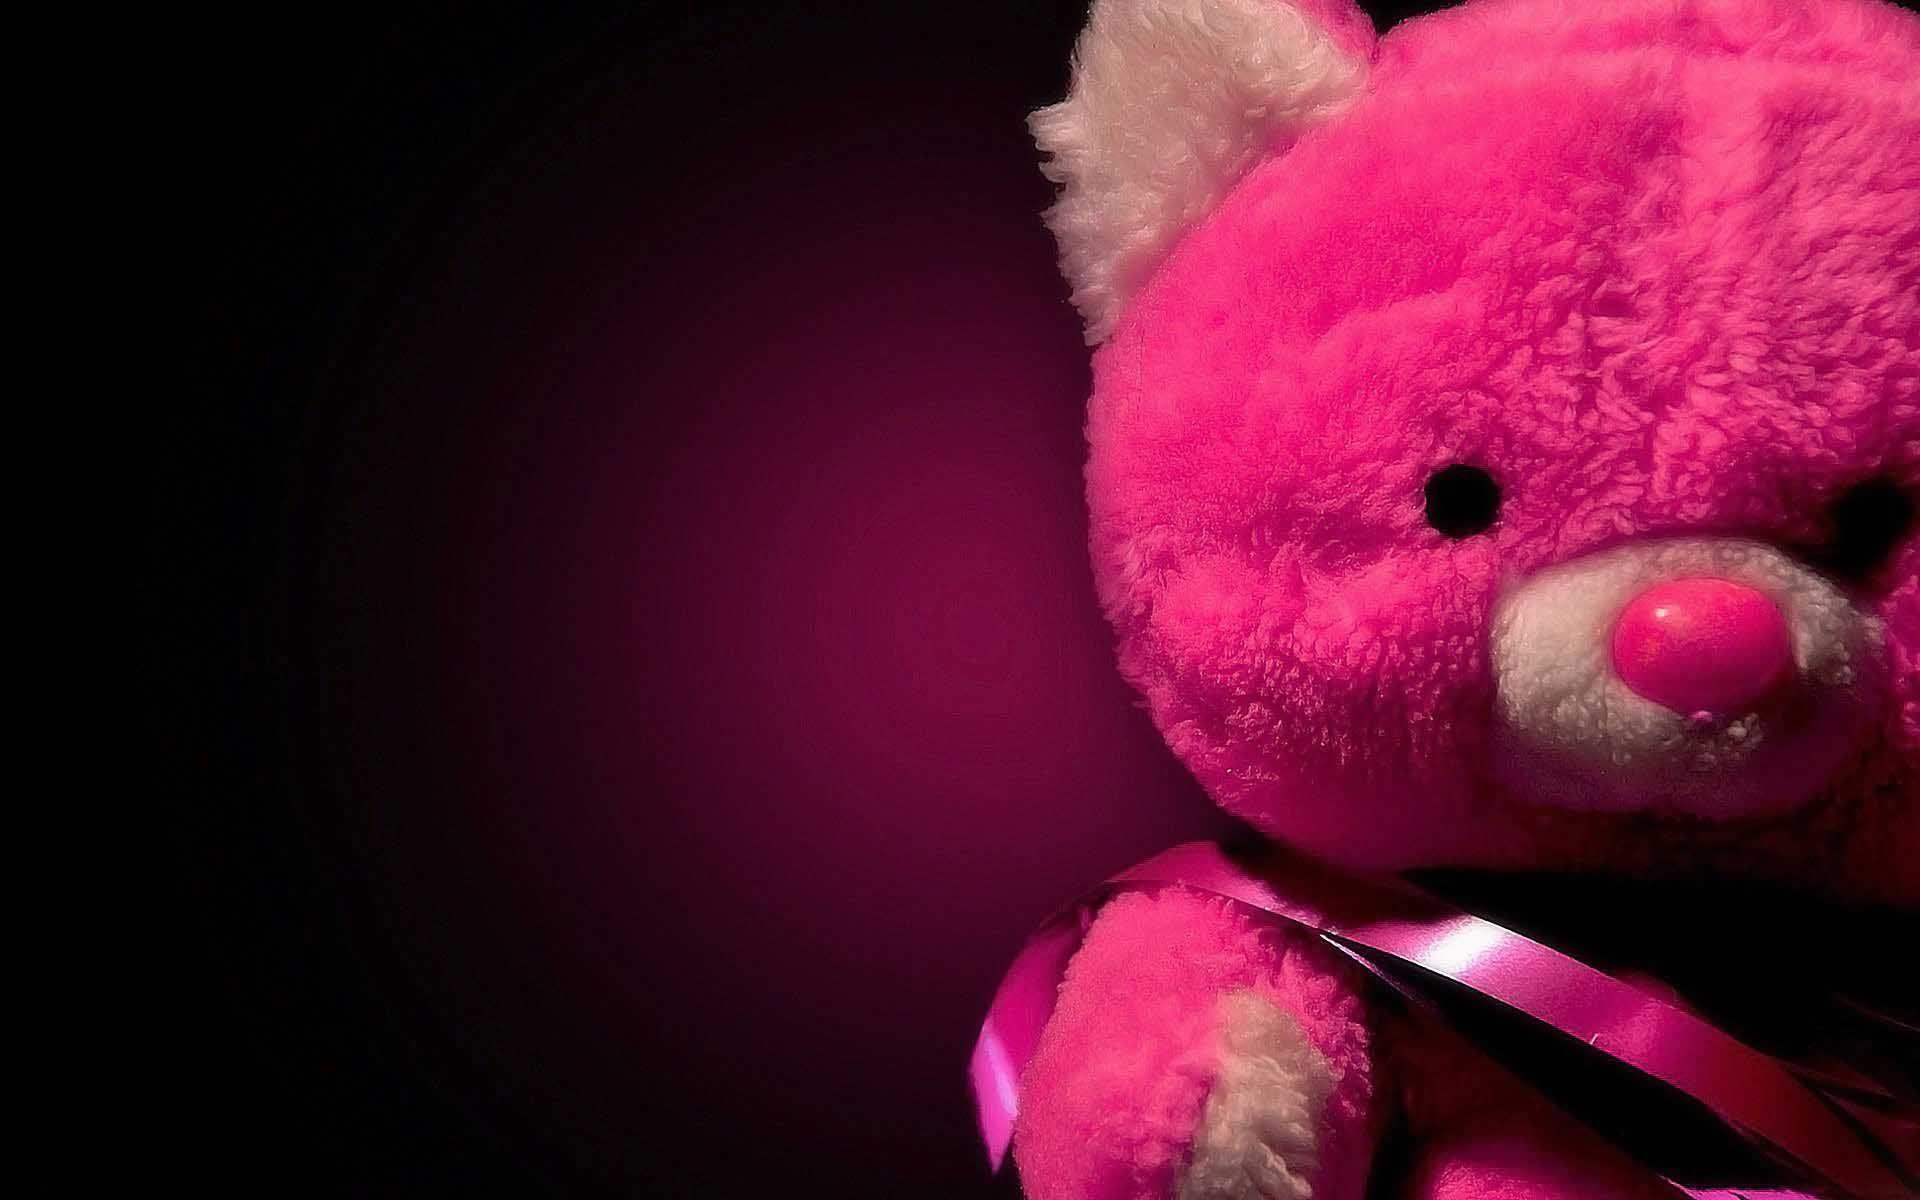 Adorable Teddy Latest HD Wallpaper Free Download. New HD